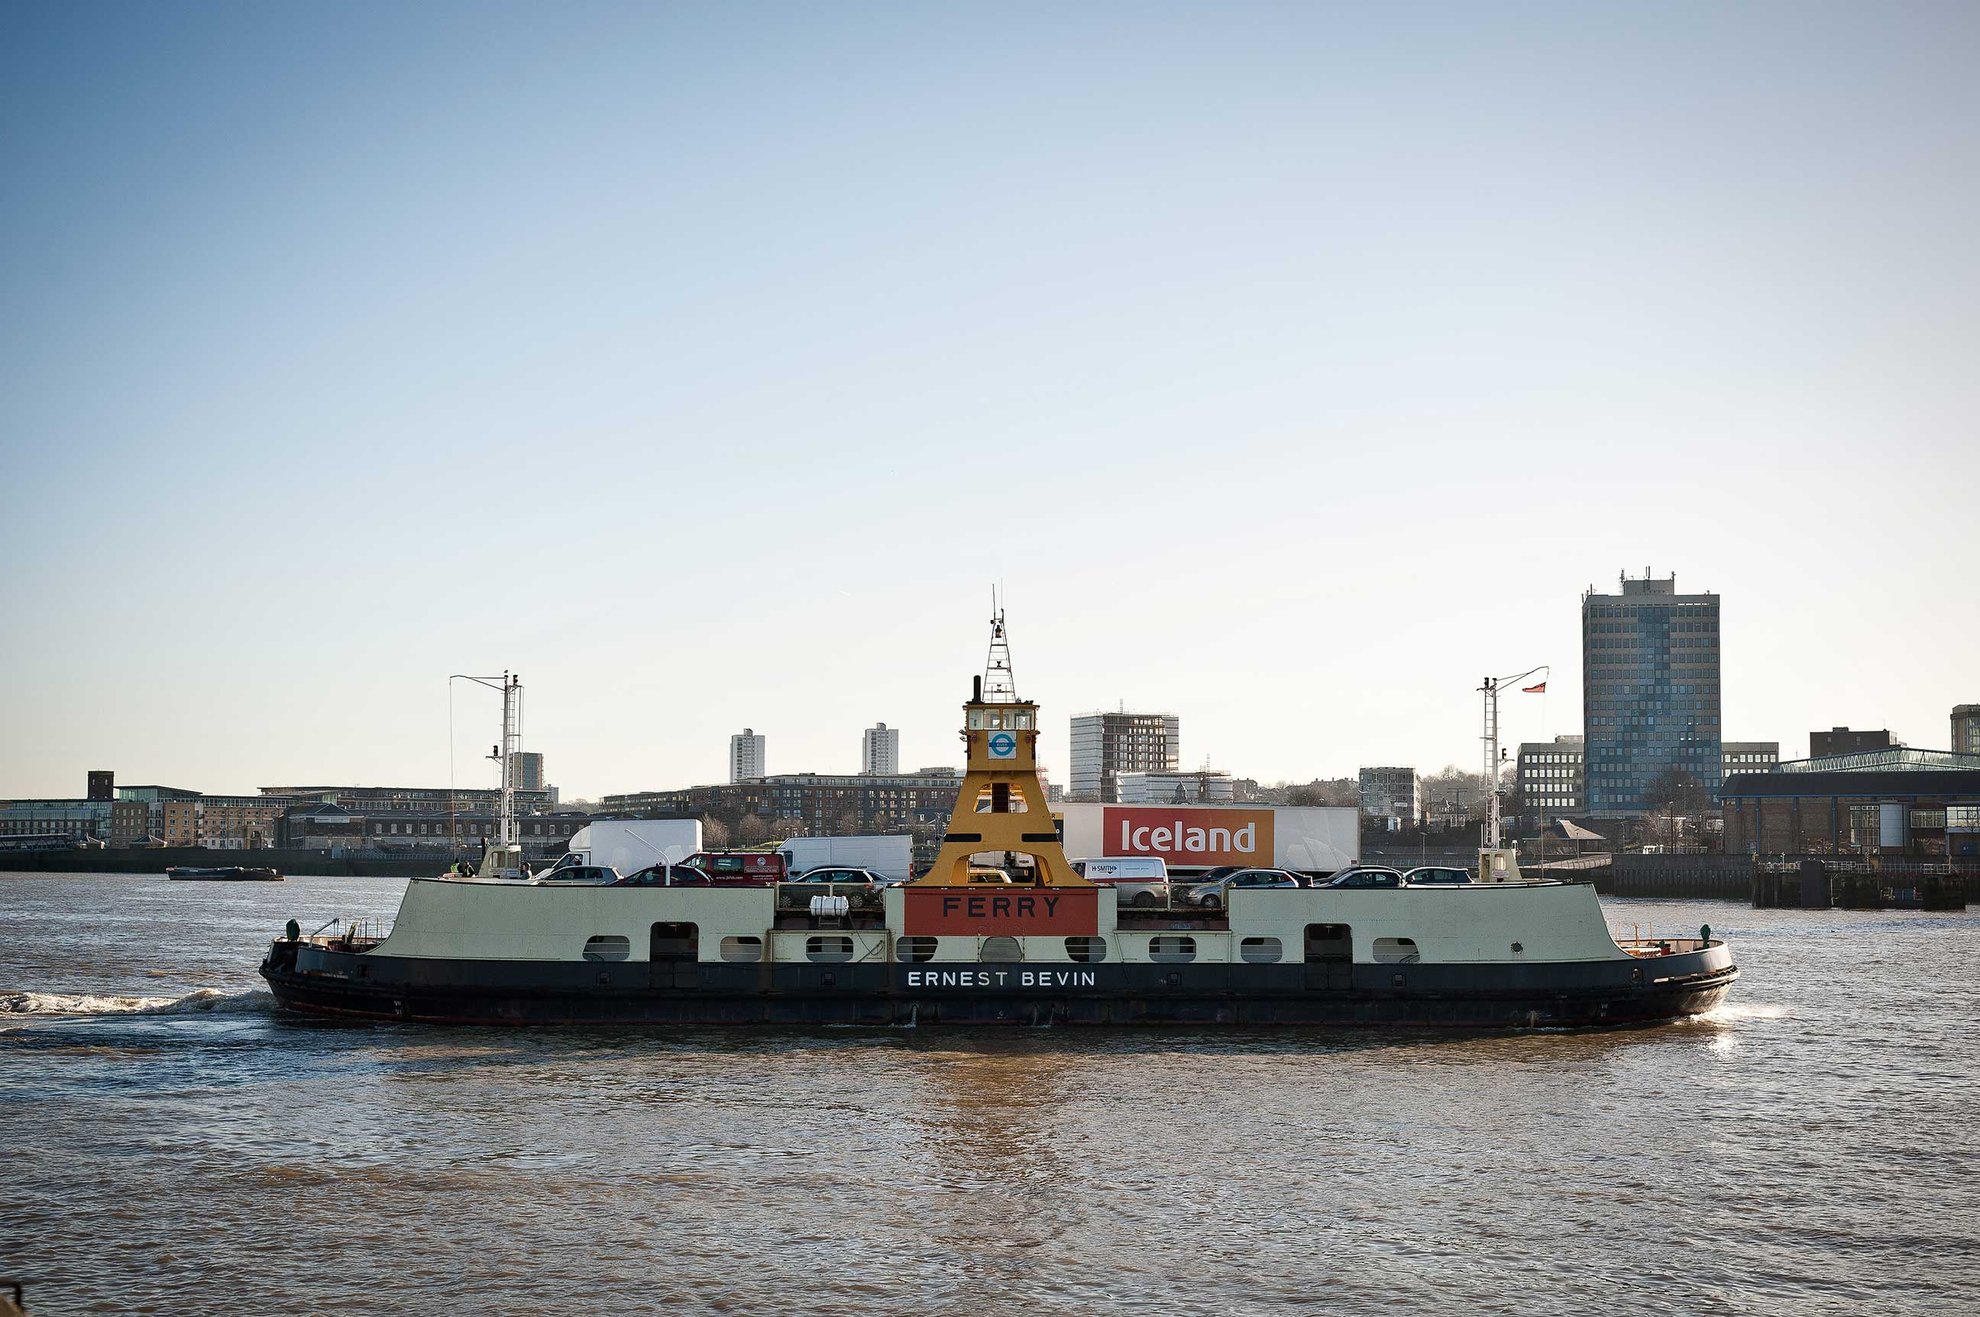 The Ernest Bevin Woolwich Ferry